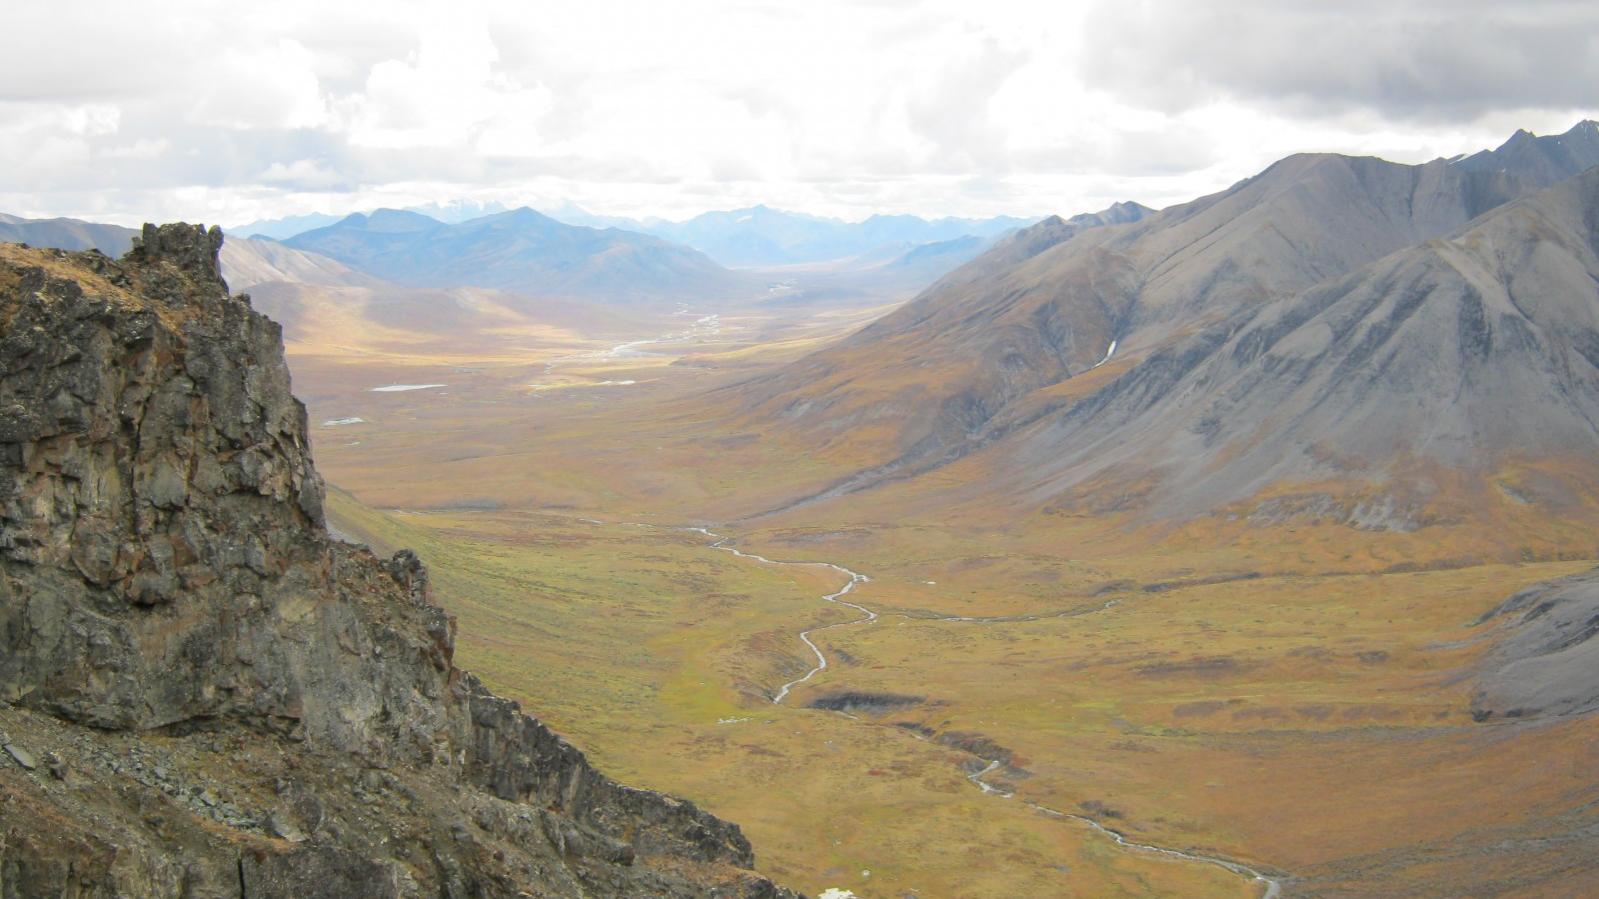 Yukon Valley Near the MM Critical Minerals Exploration Project in the Yukon Territory